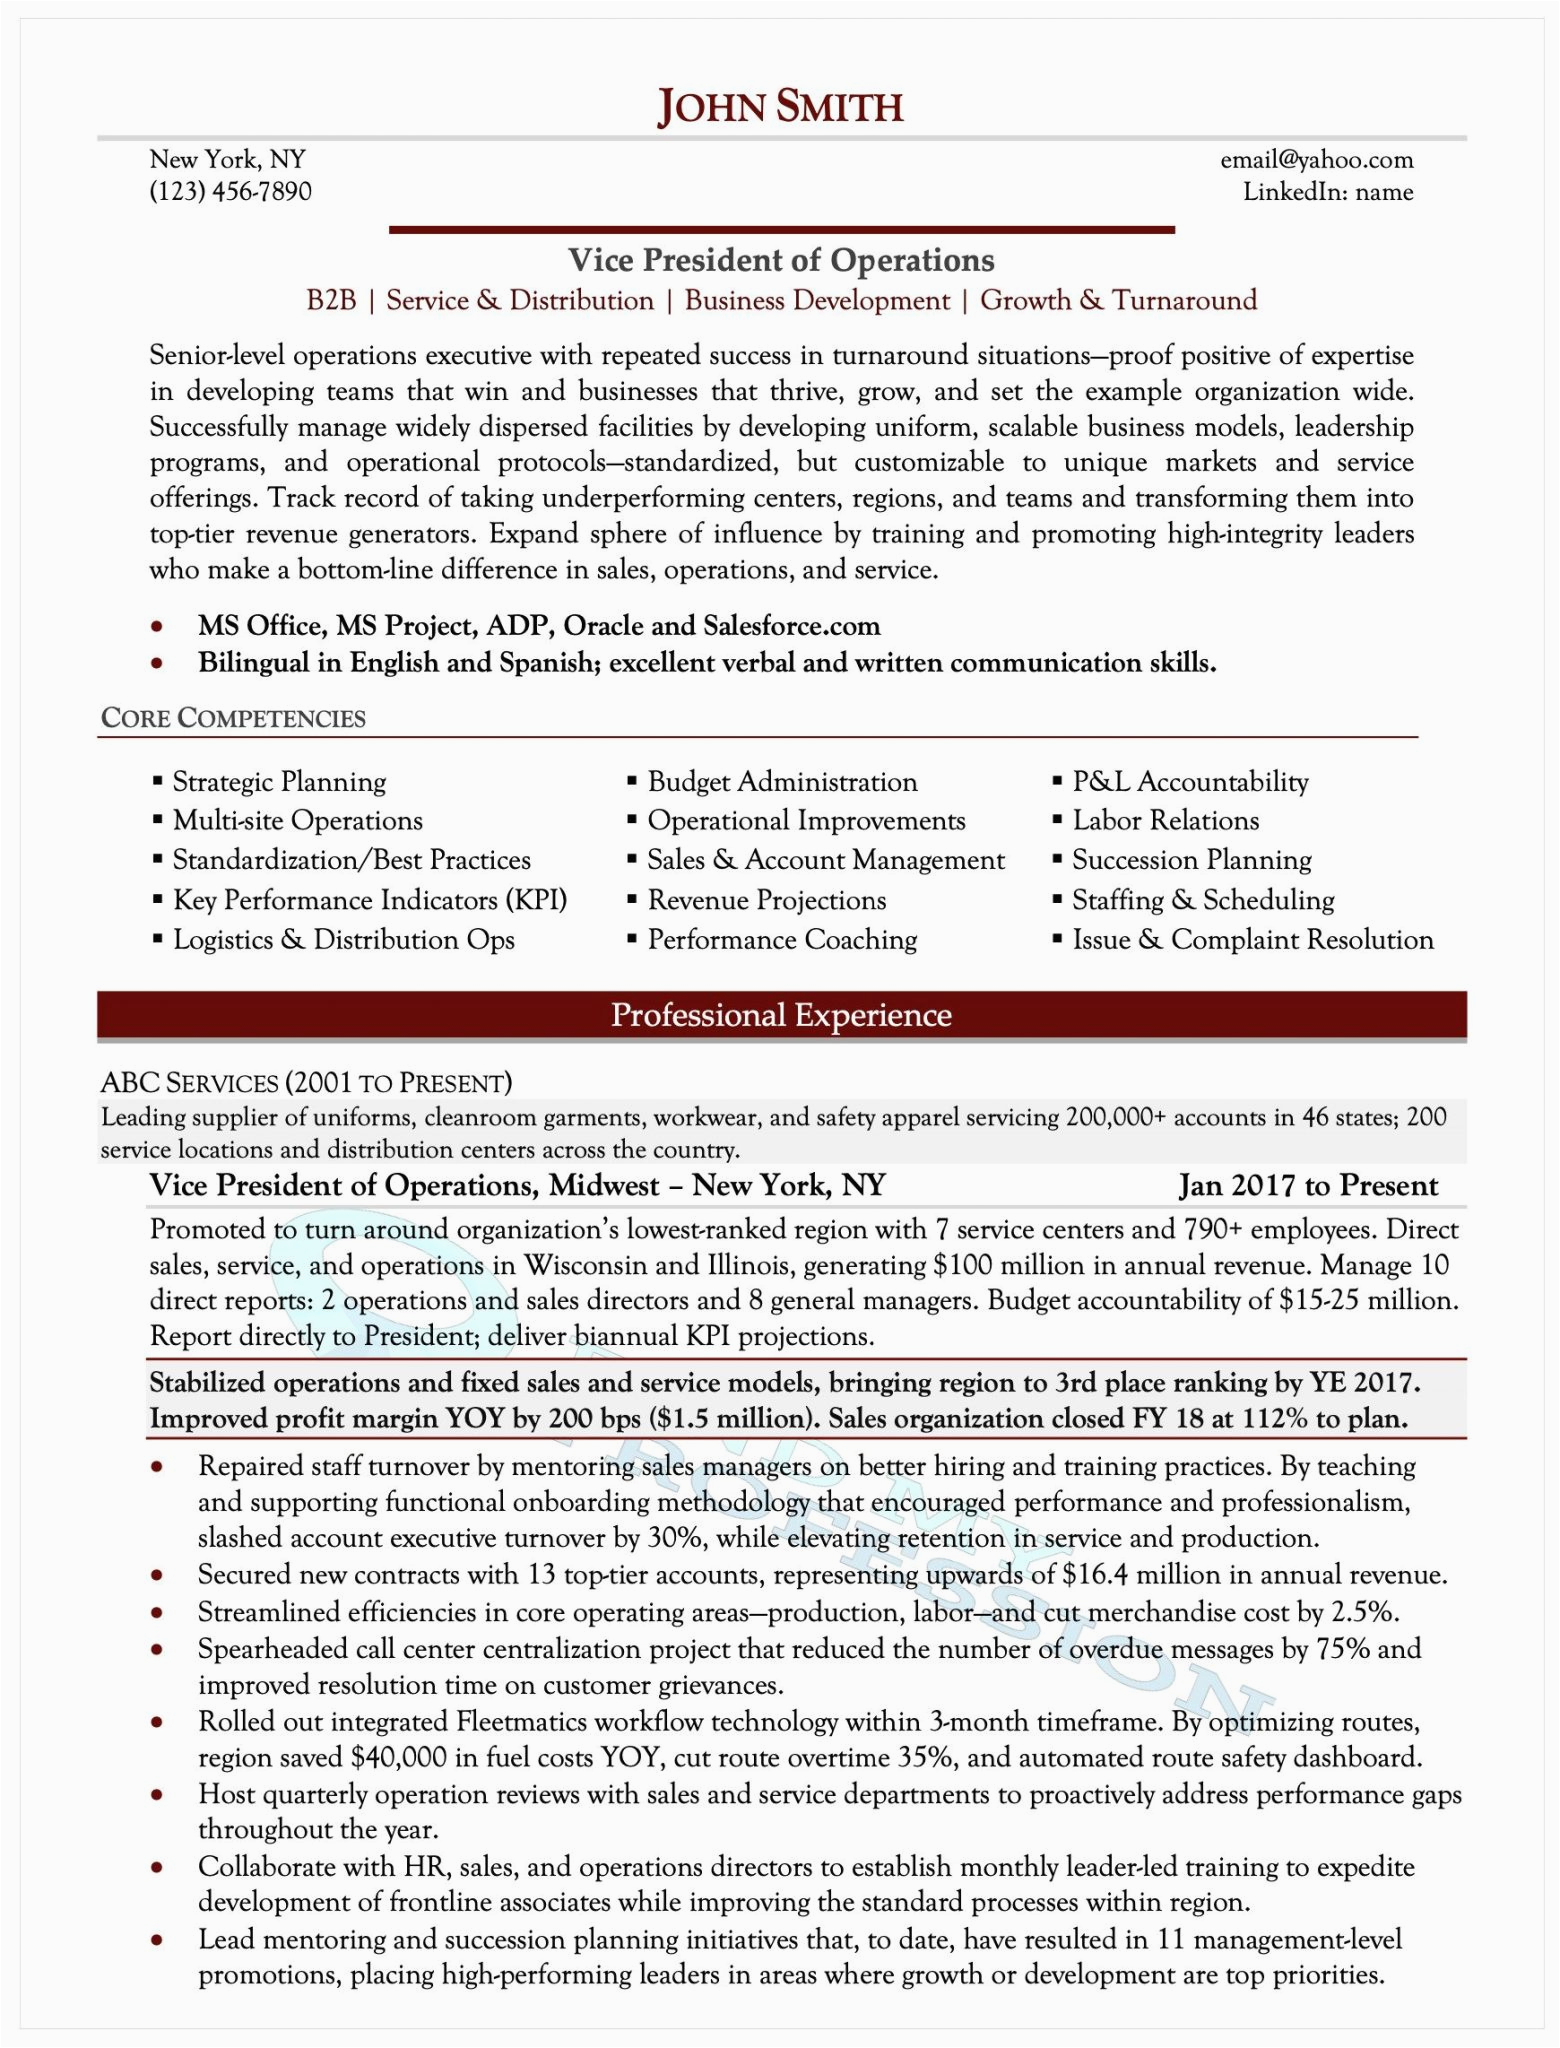 Sample Resume formats to Fit Alot Of Information How to Write An Elite Executive Resume 10 Simple Tips Wisestep